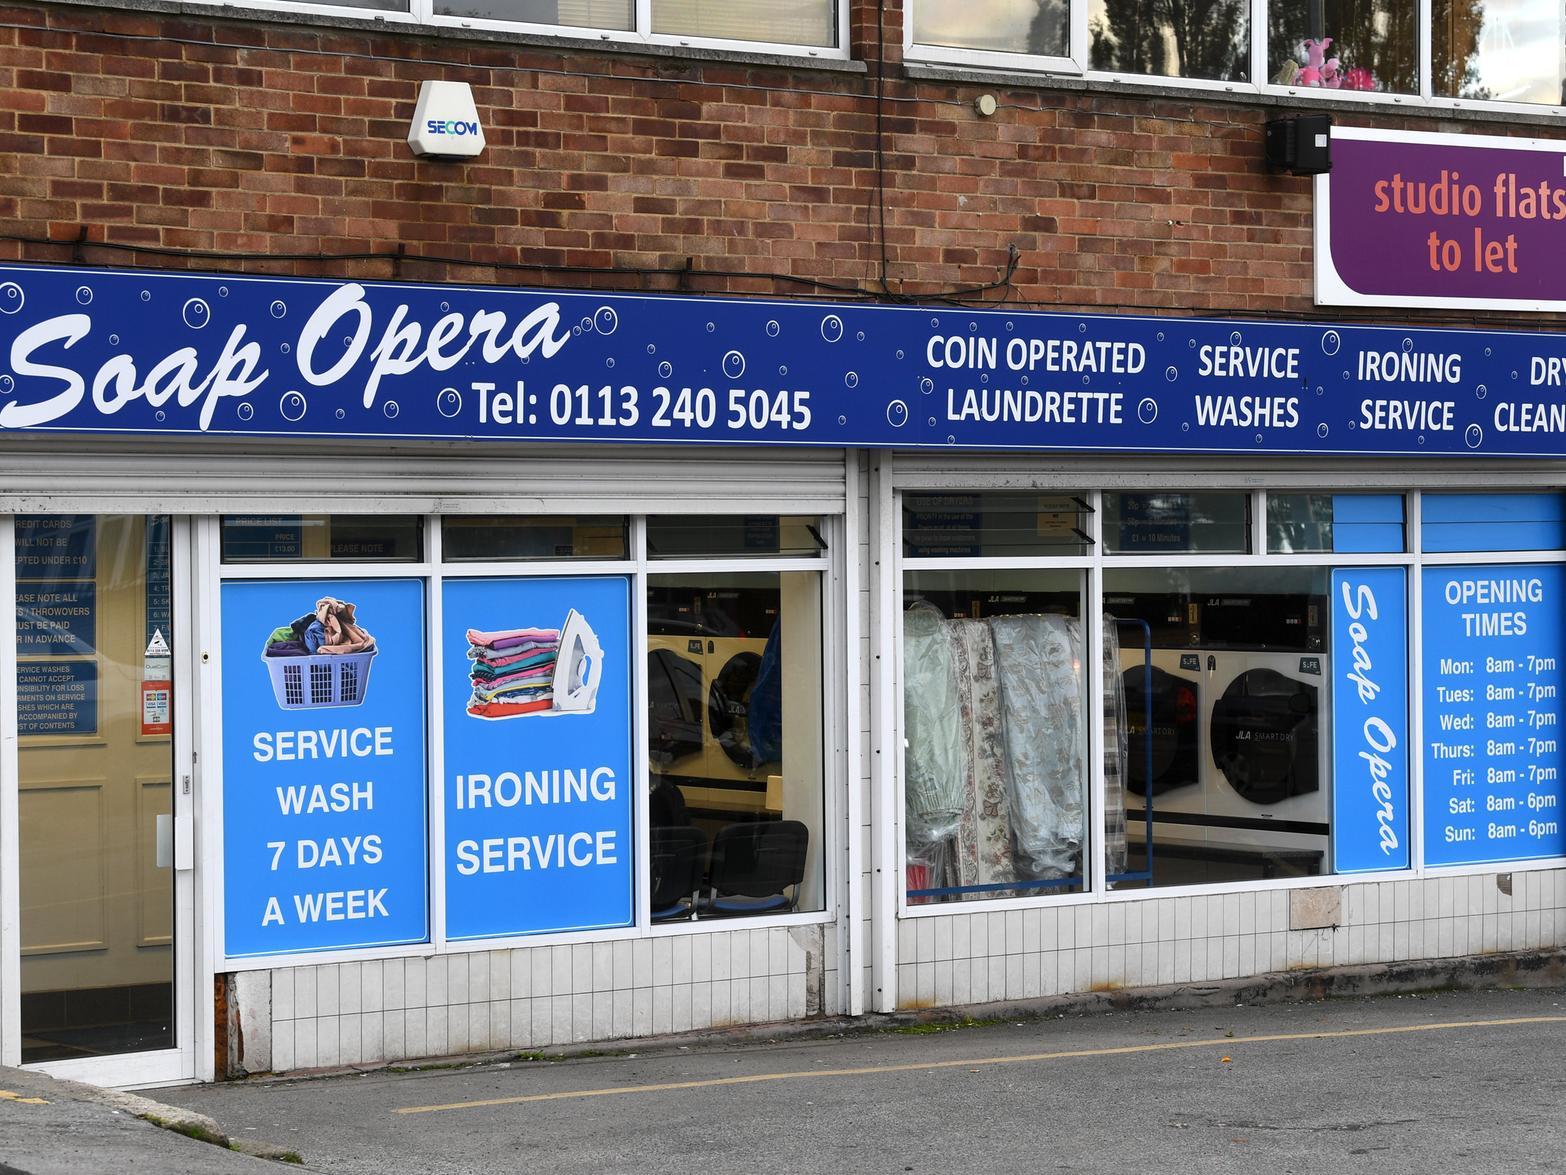 All soap fans welcome! Are you a customer at this launderette/dry cleaners on Easterly Road?